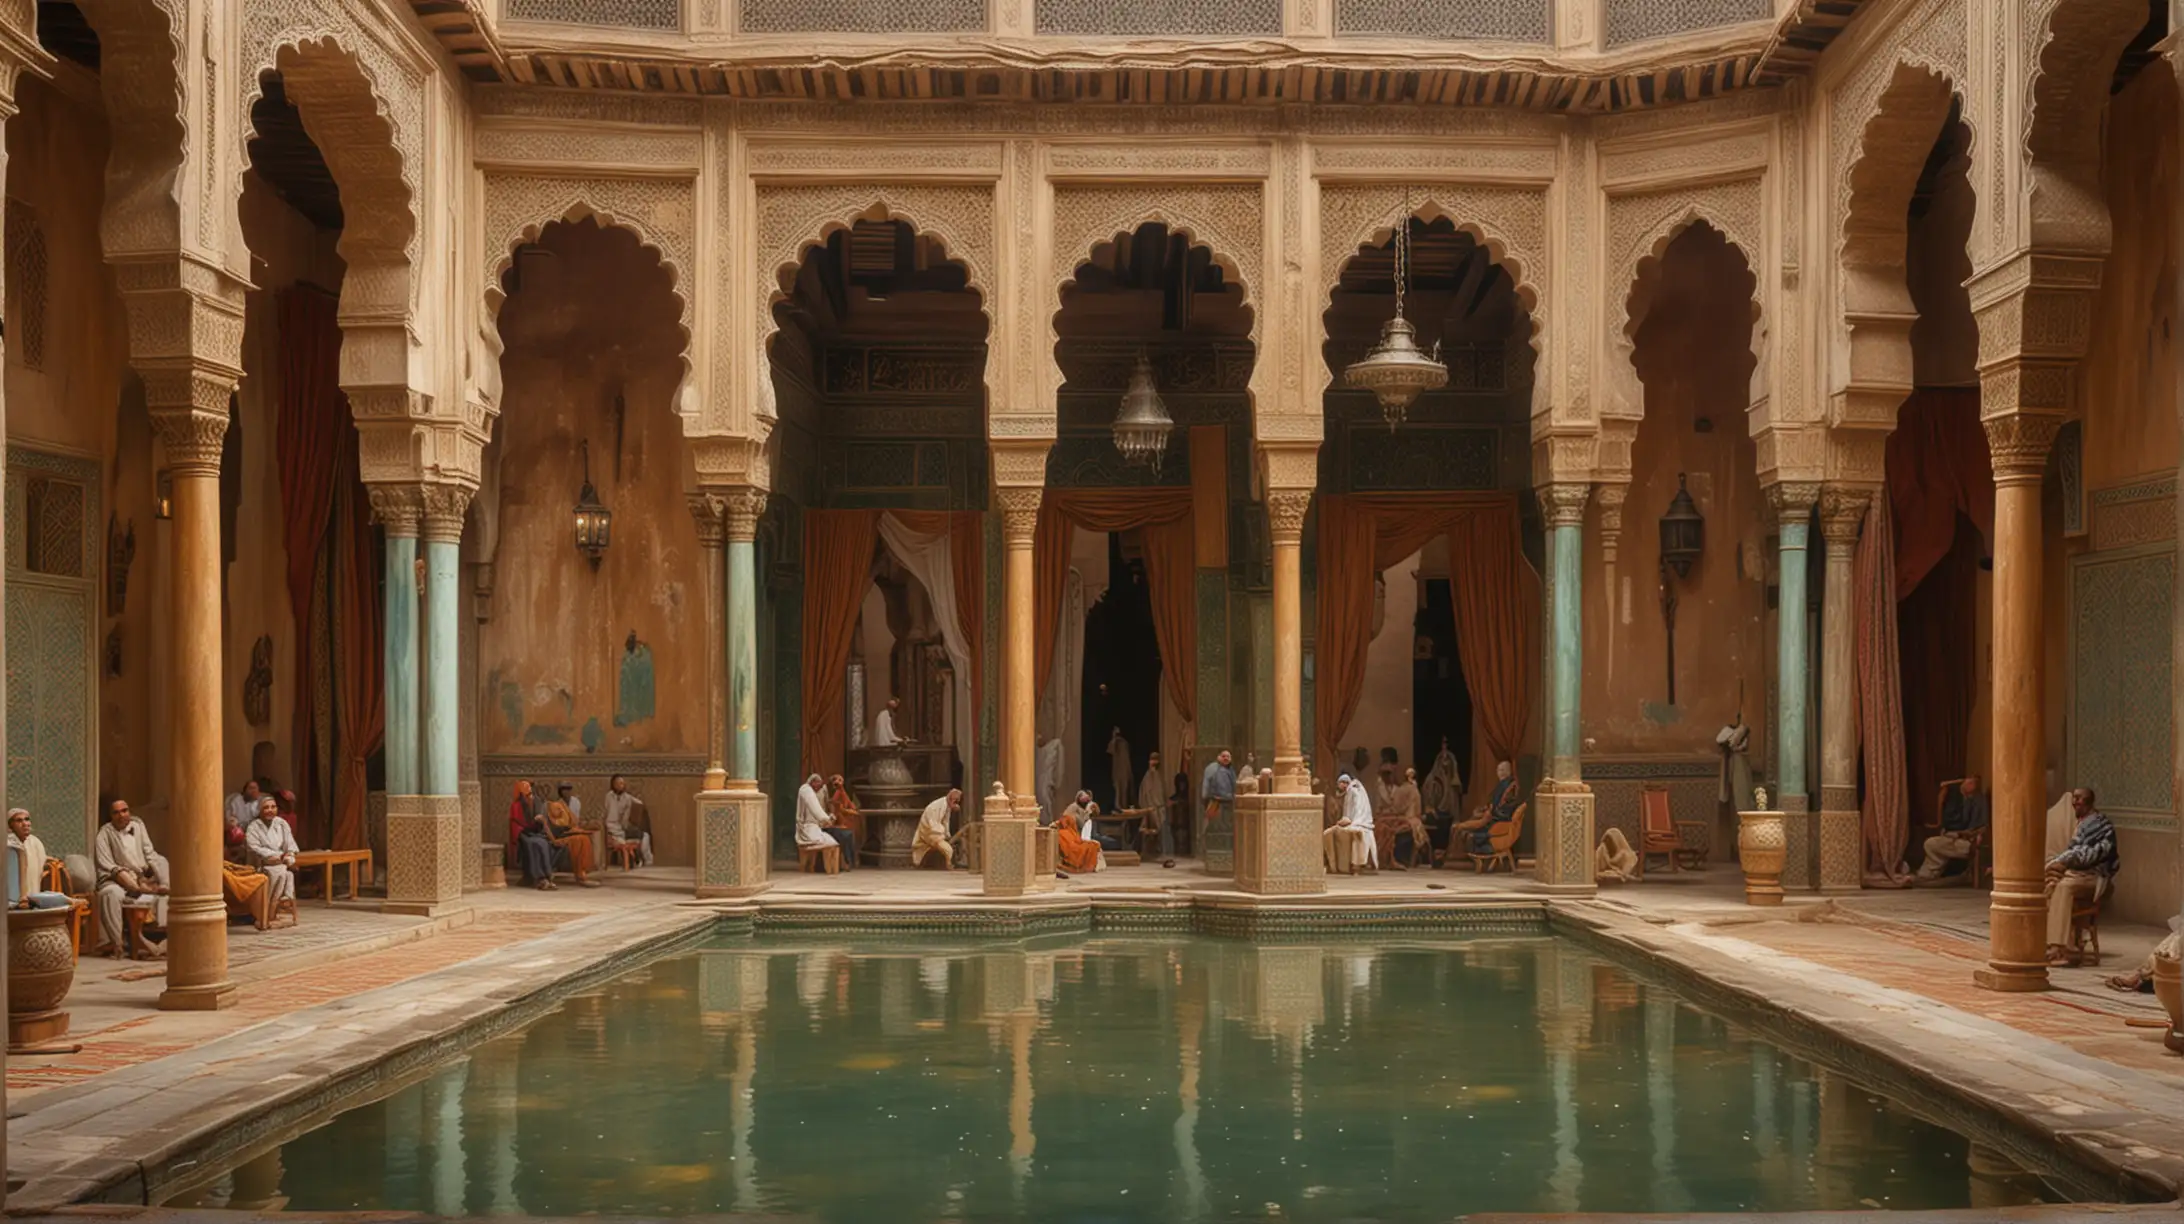 19th Century Moroccan Palace People Relaxing by Ornate Columns and Fountain